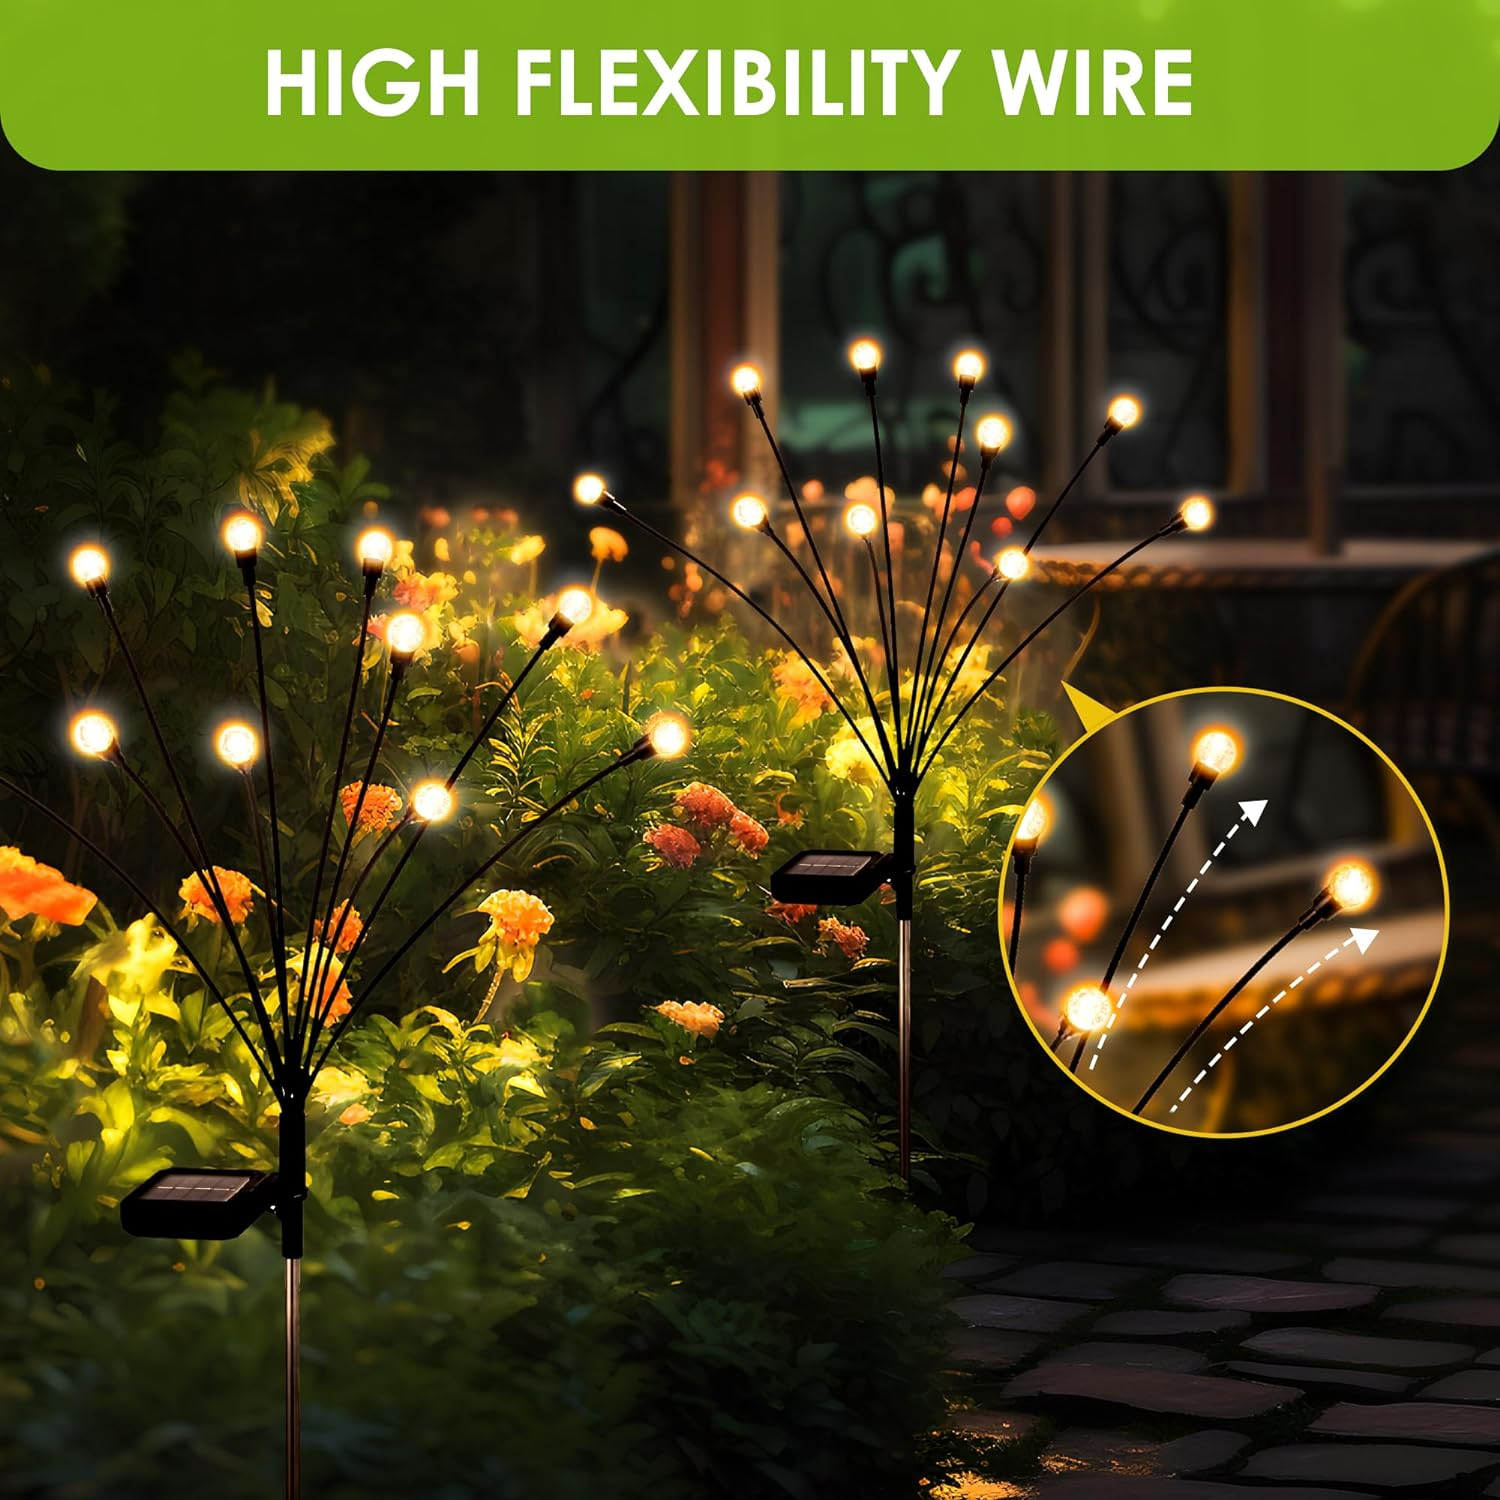 Hardoll Solar Lights Outdoor 6 LED Crystal Lamp for Home Garden Waterproof Decoration (Warm White-Pack of 1)